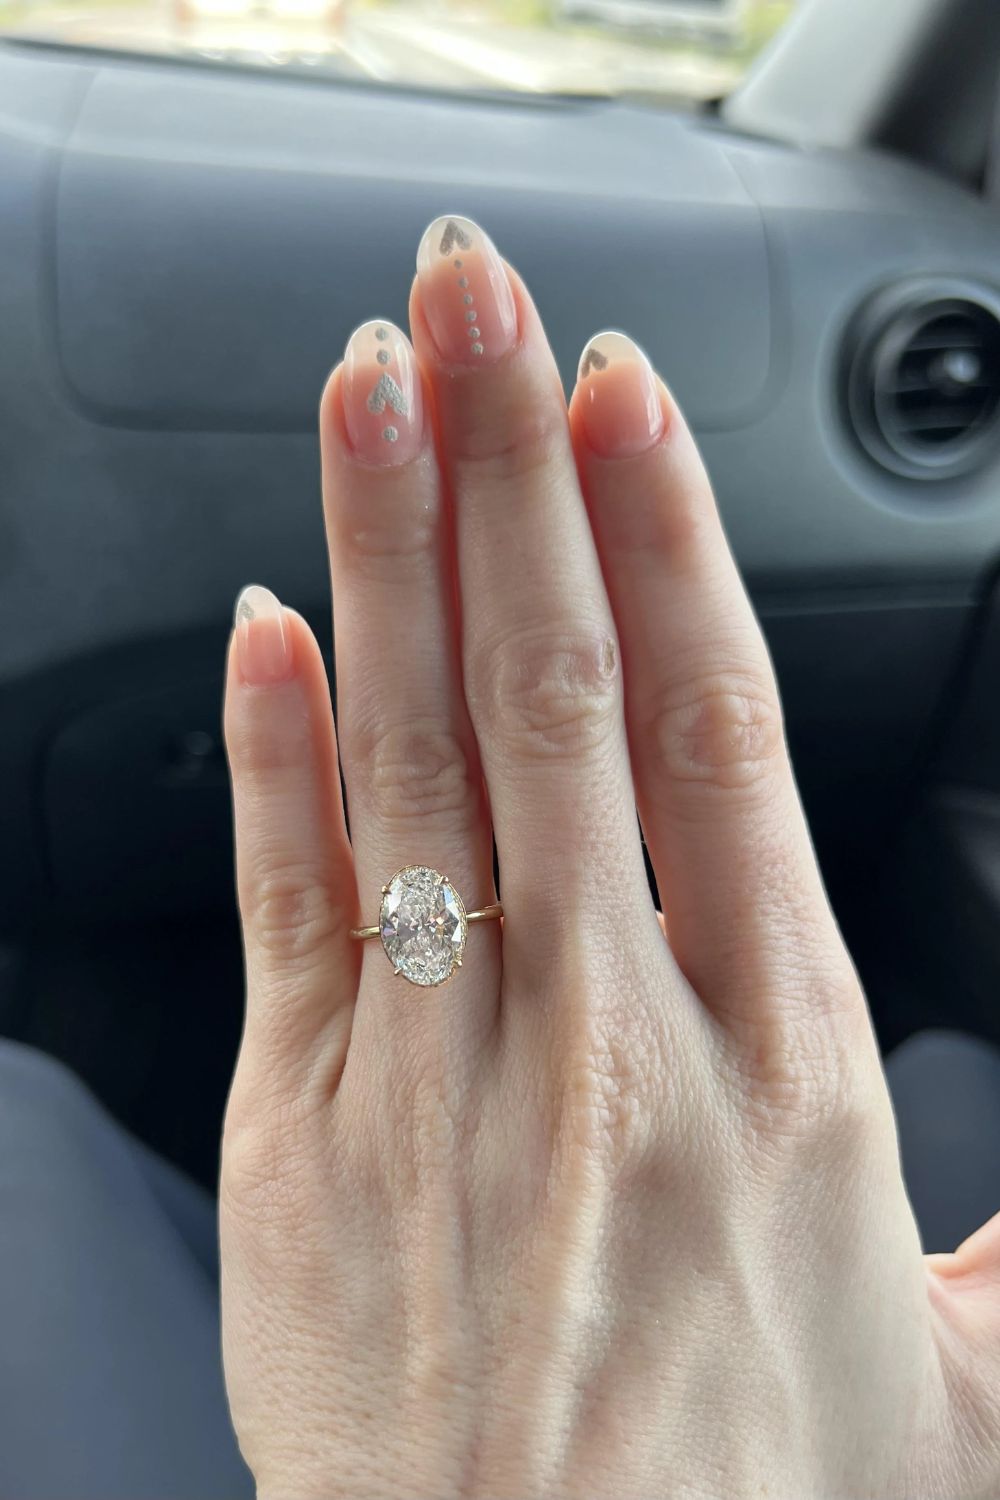 Obsessed With My Peekaboo Halo Oval Diamond Ring!